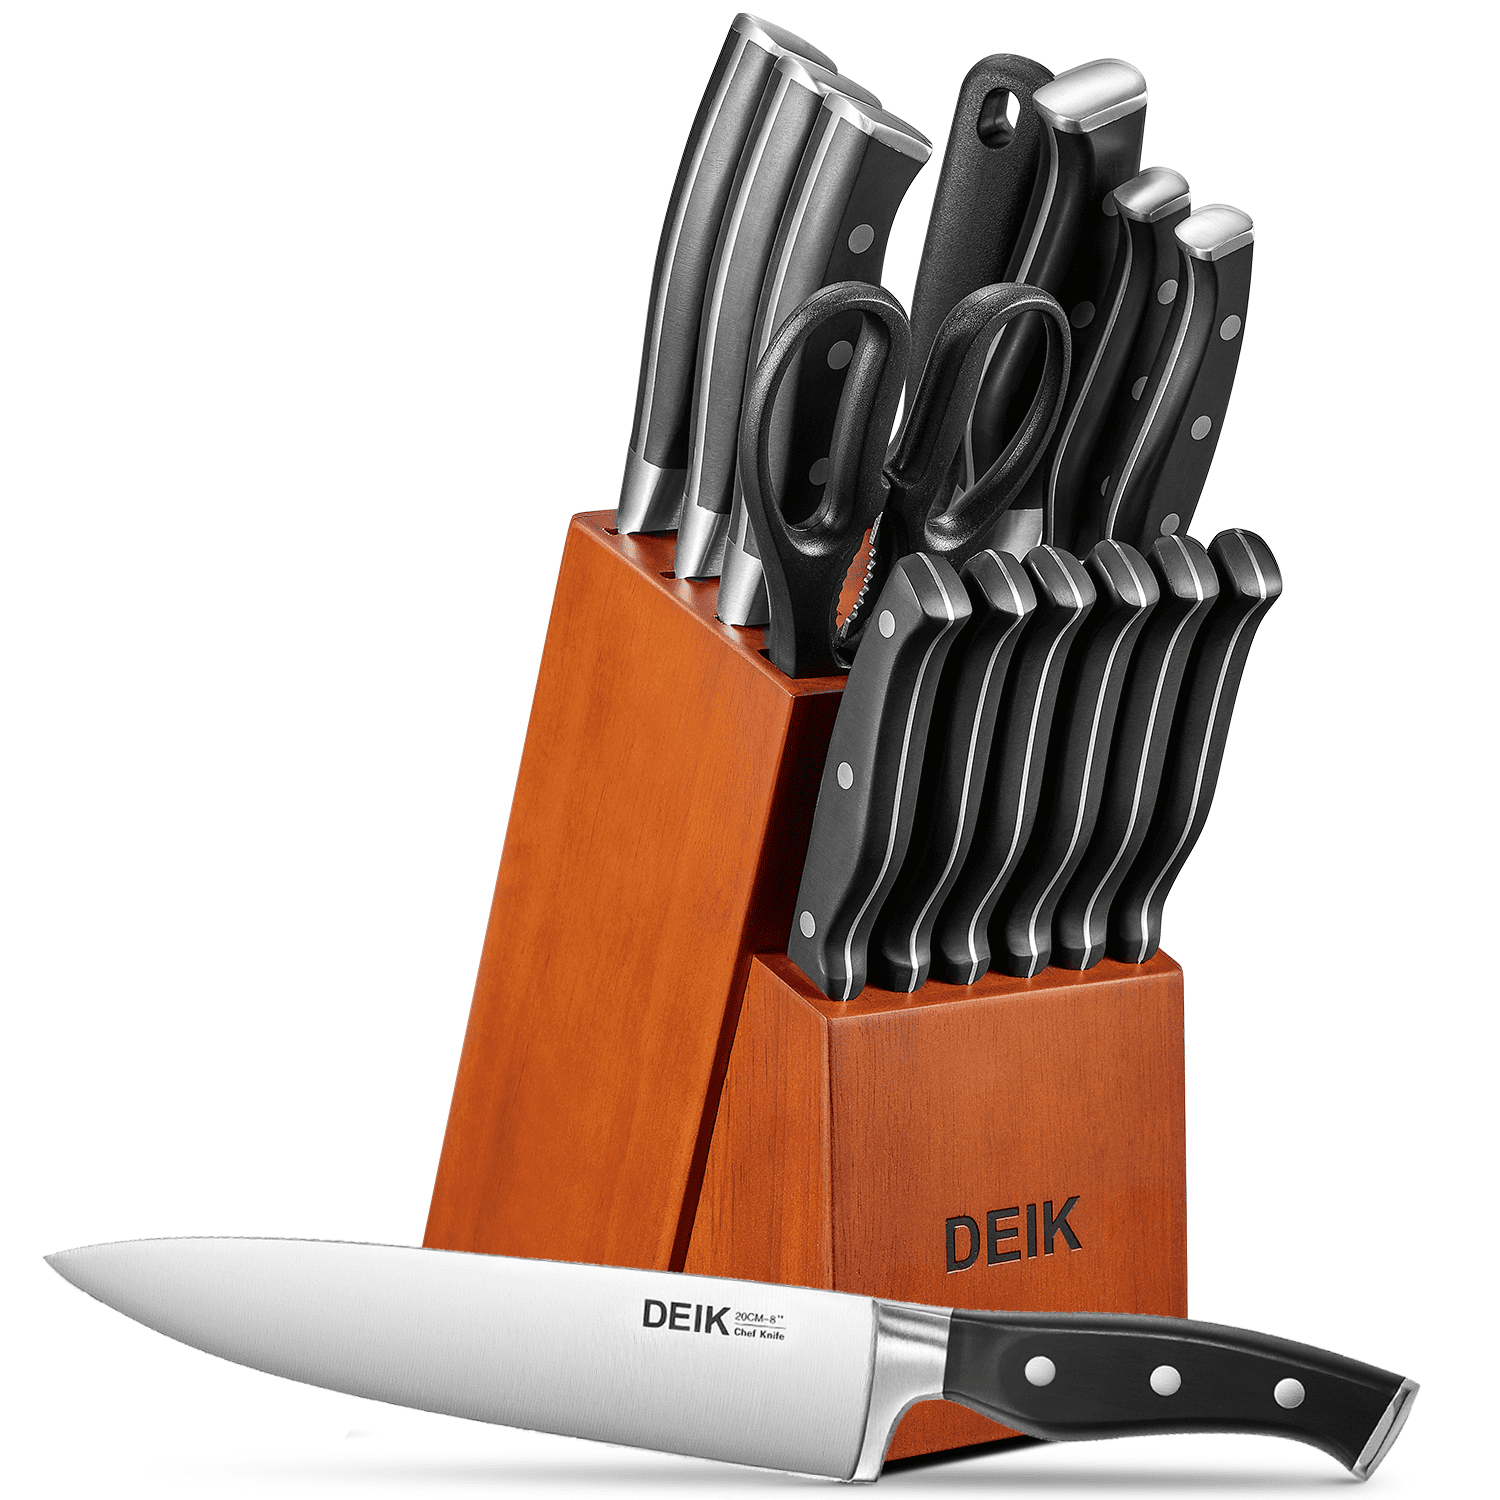 Flenc Kai Kitchen Knife Set 19 Pieces German Stainless Steel Knife Set with  Block and Meat Shredder Claws & Reviews